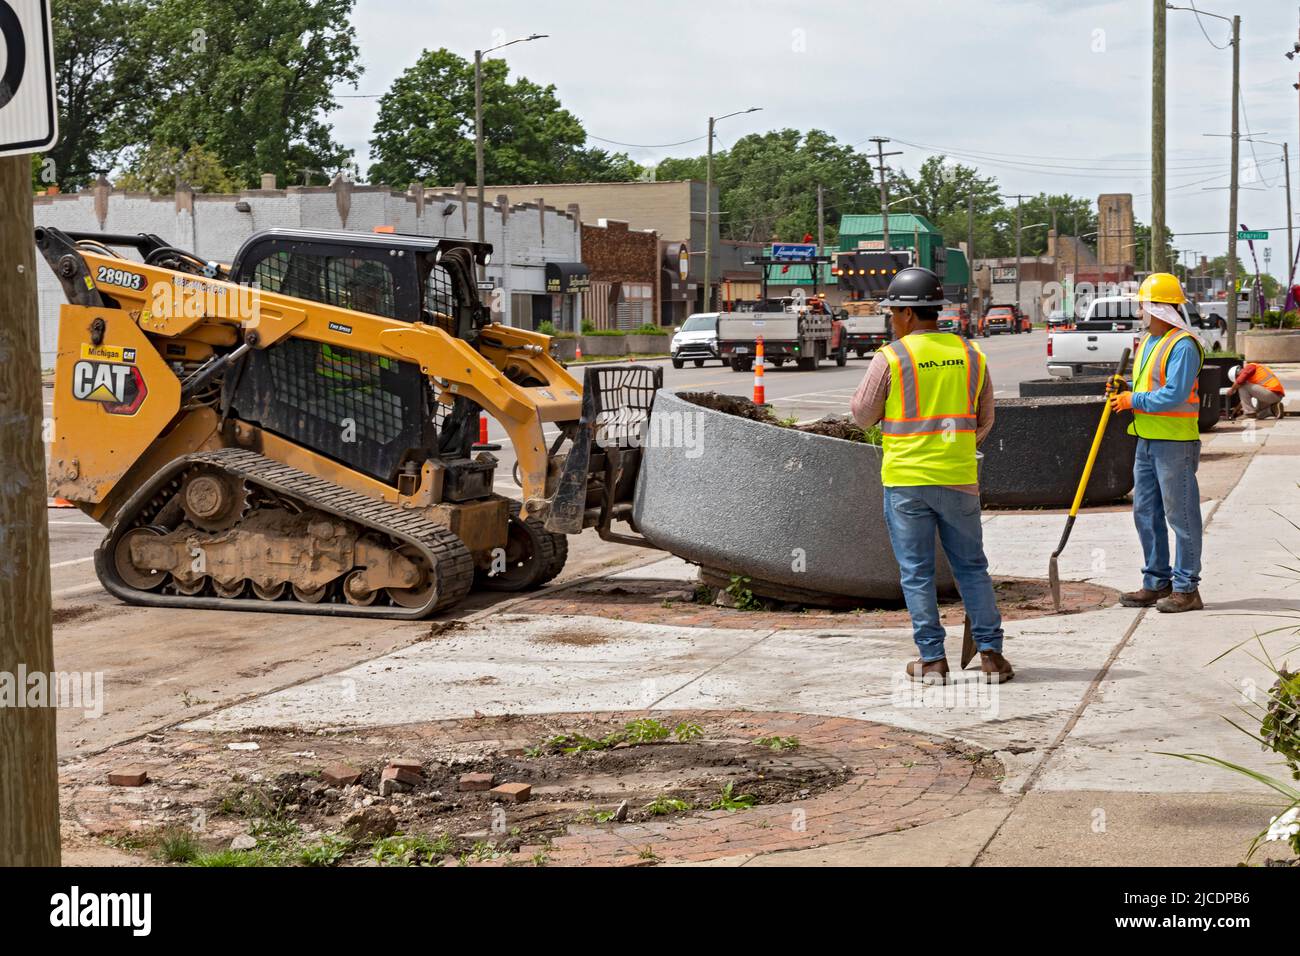 Detroit, Michigan - Workers remove old concrete planters as part of a plan to improve the streetscape on East Warren Avenue where there are many empty Stock Photo